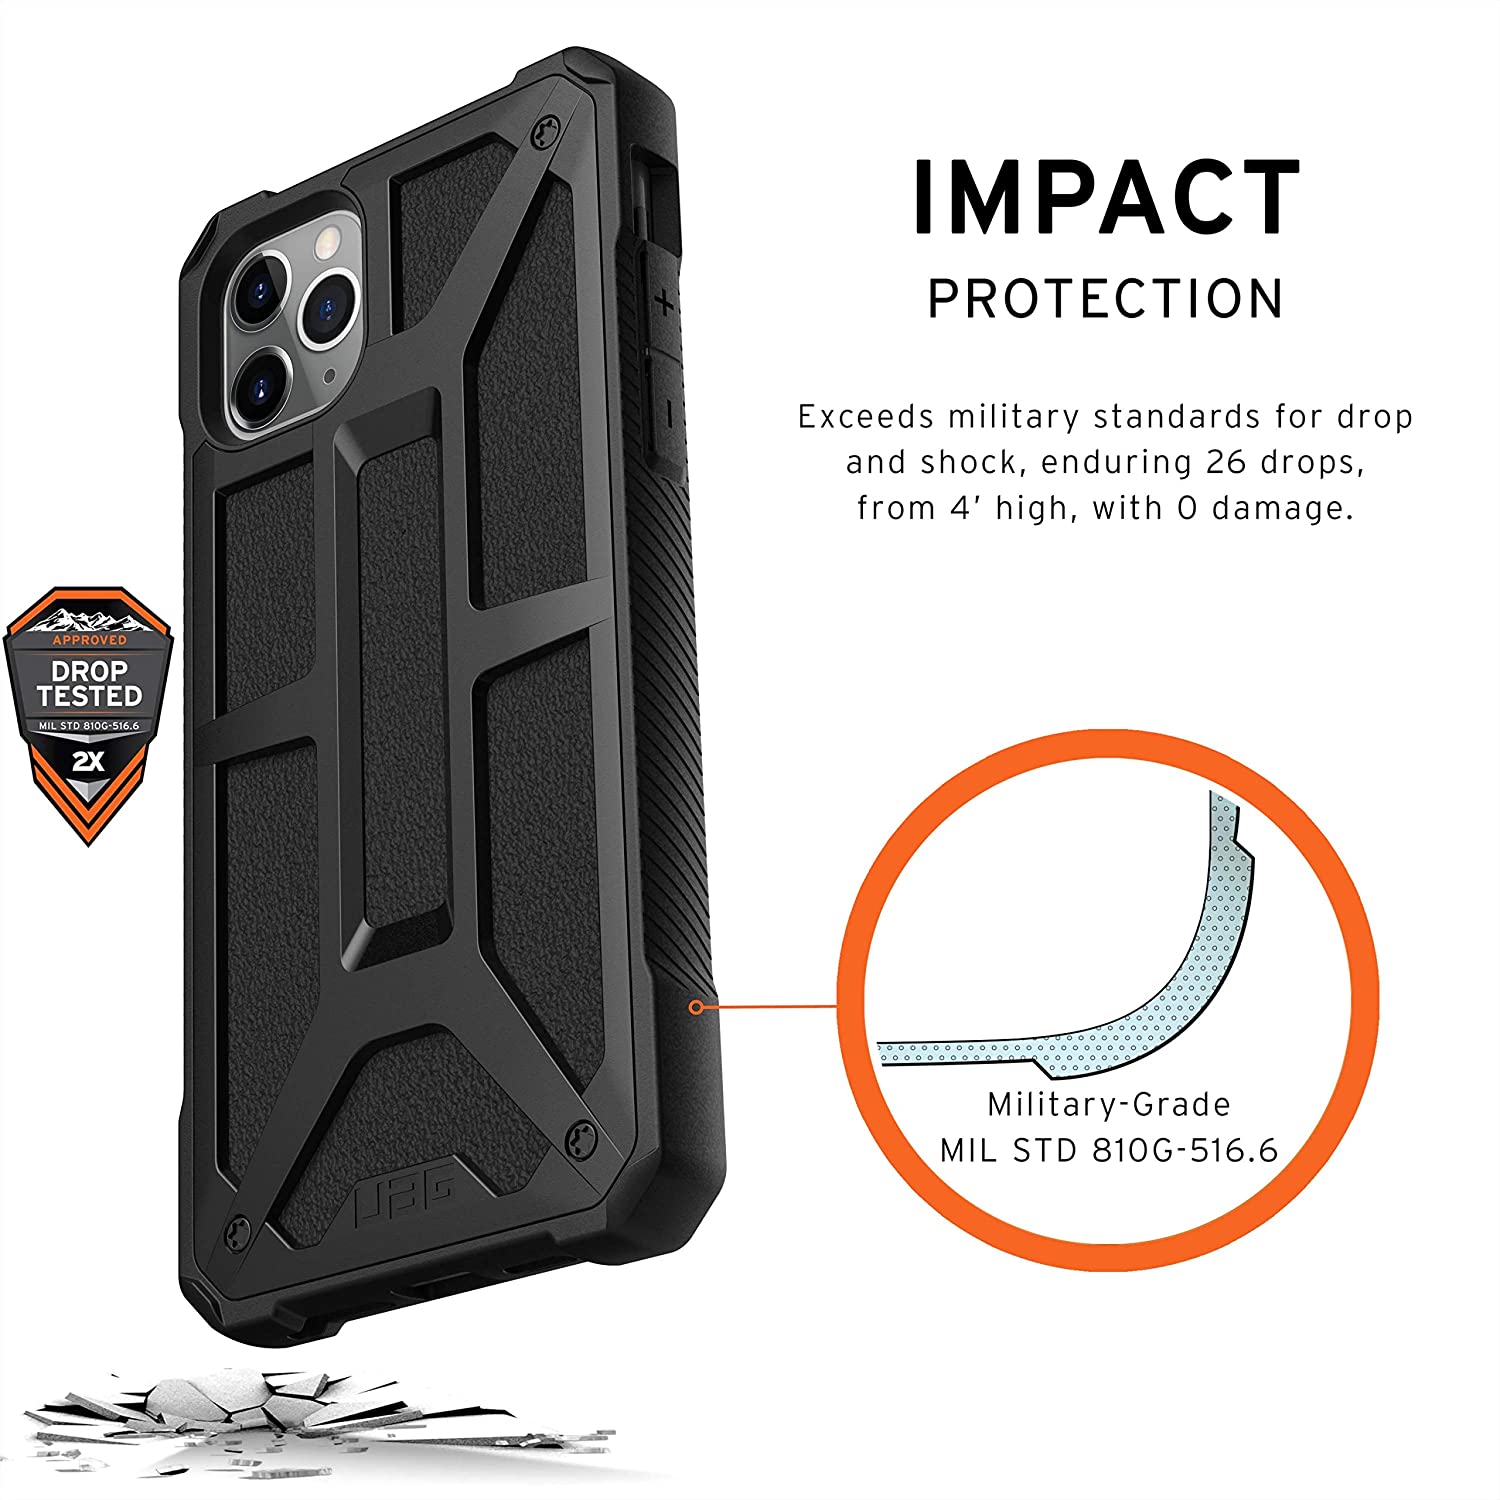 UAG iPhone 11 / Pro / Pro Max Monarch Feather-Light Rugged Military Drop Tested Case